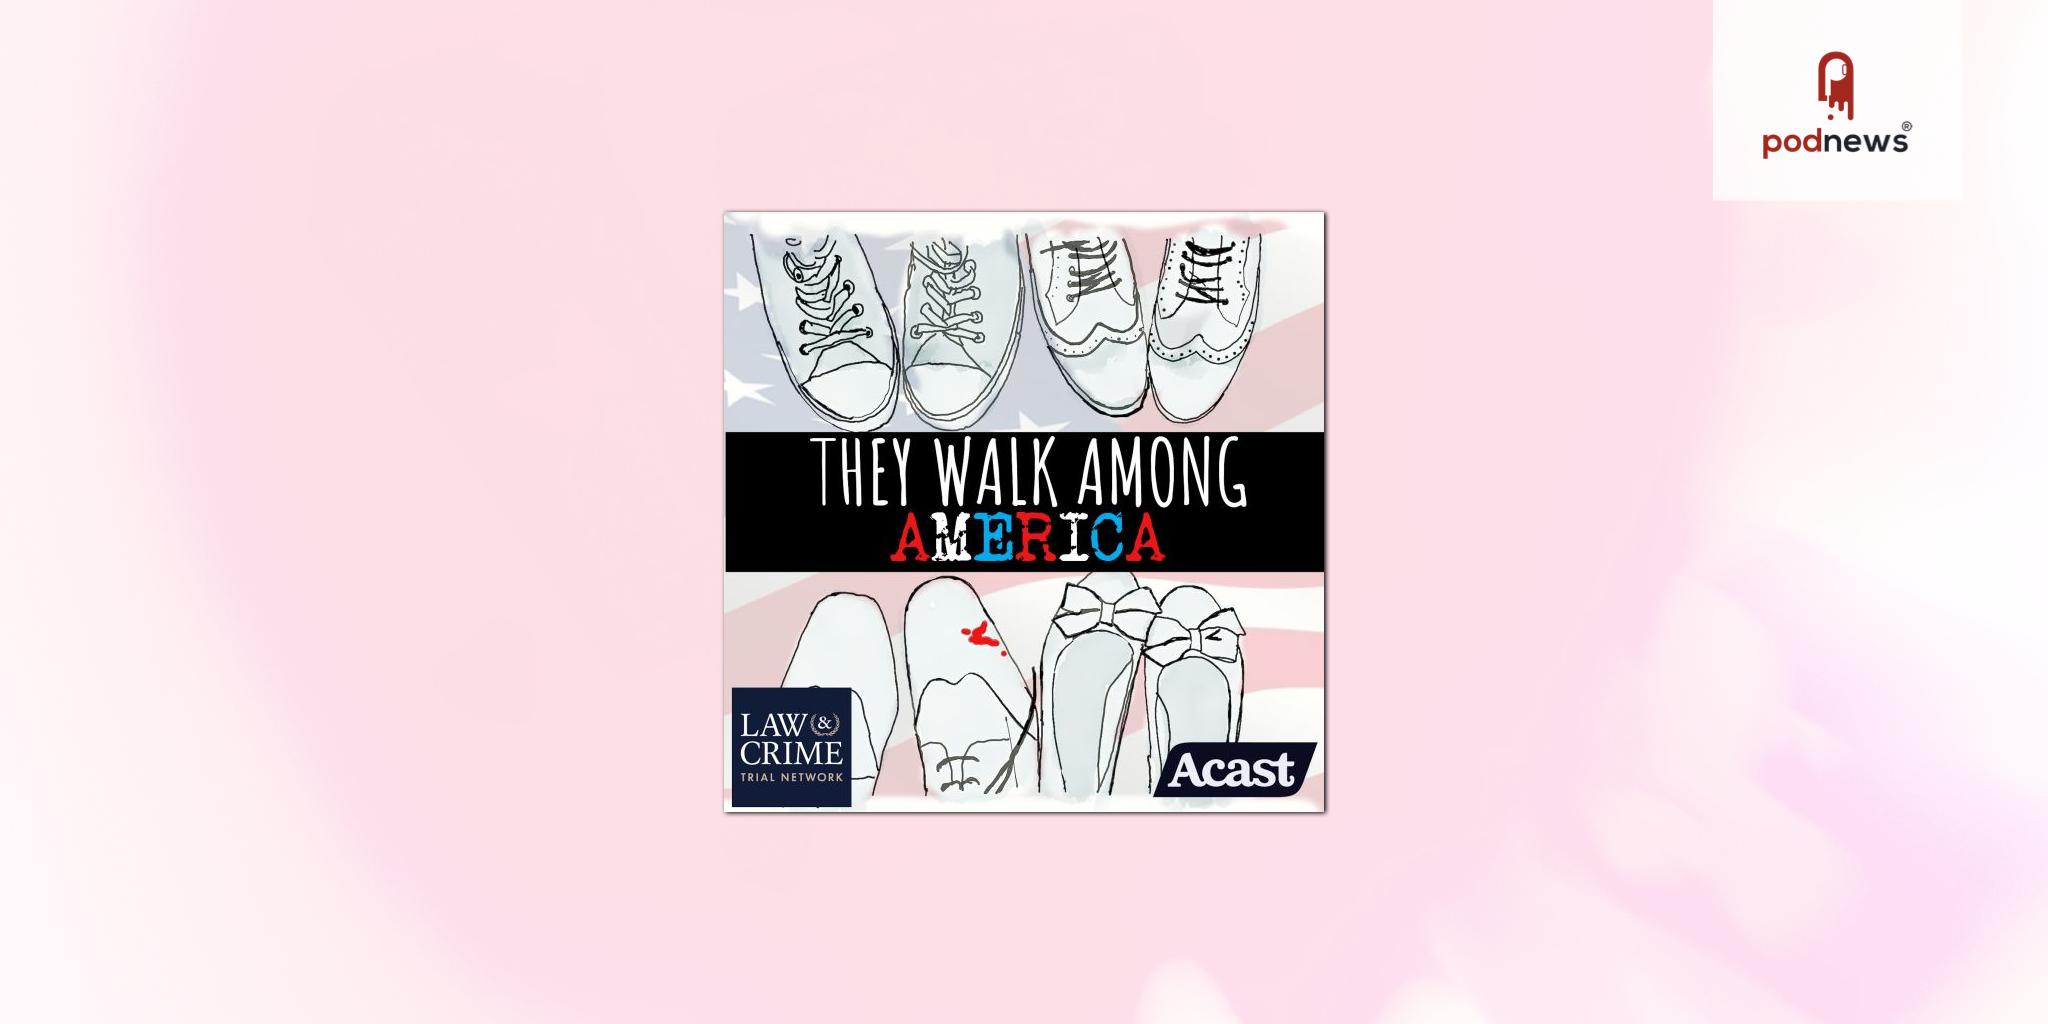 Award-winning true-crime podcast They Walk Among Us renews agreement with Acast and launches spin-off series